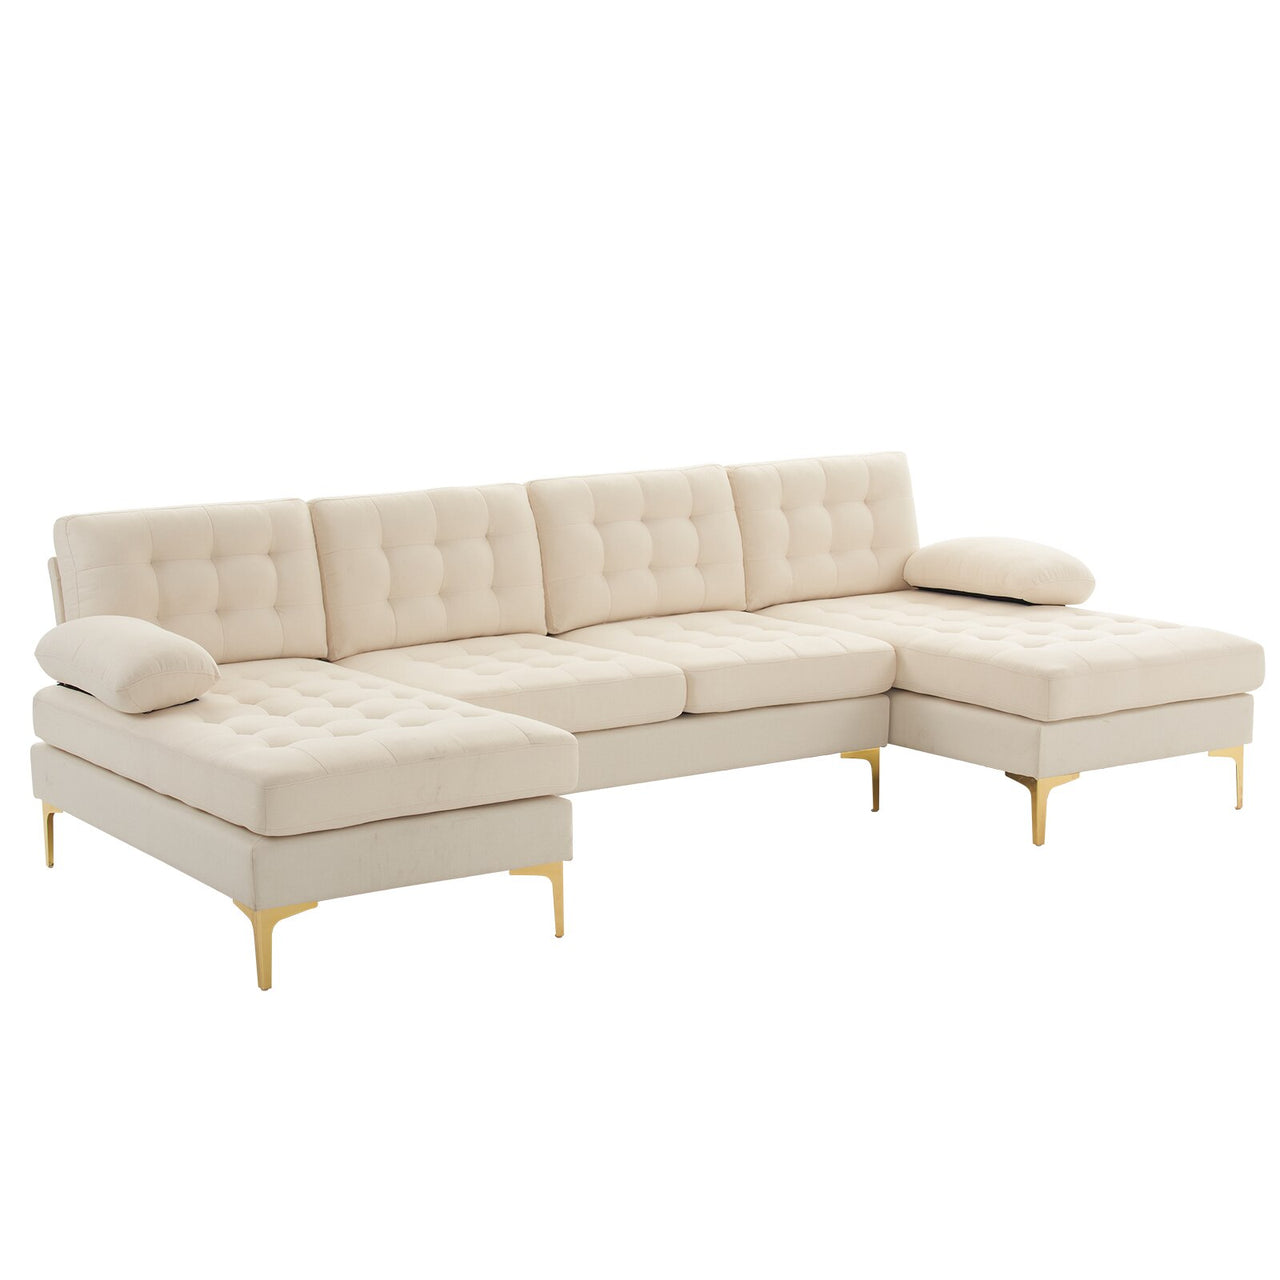 Beige Indoor Sectional Sofa with U-shaped Armrest and Golden Feet